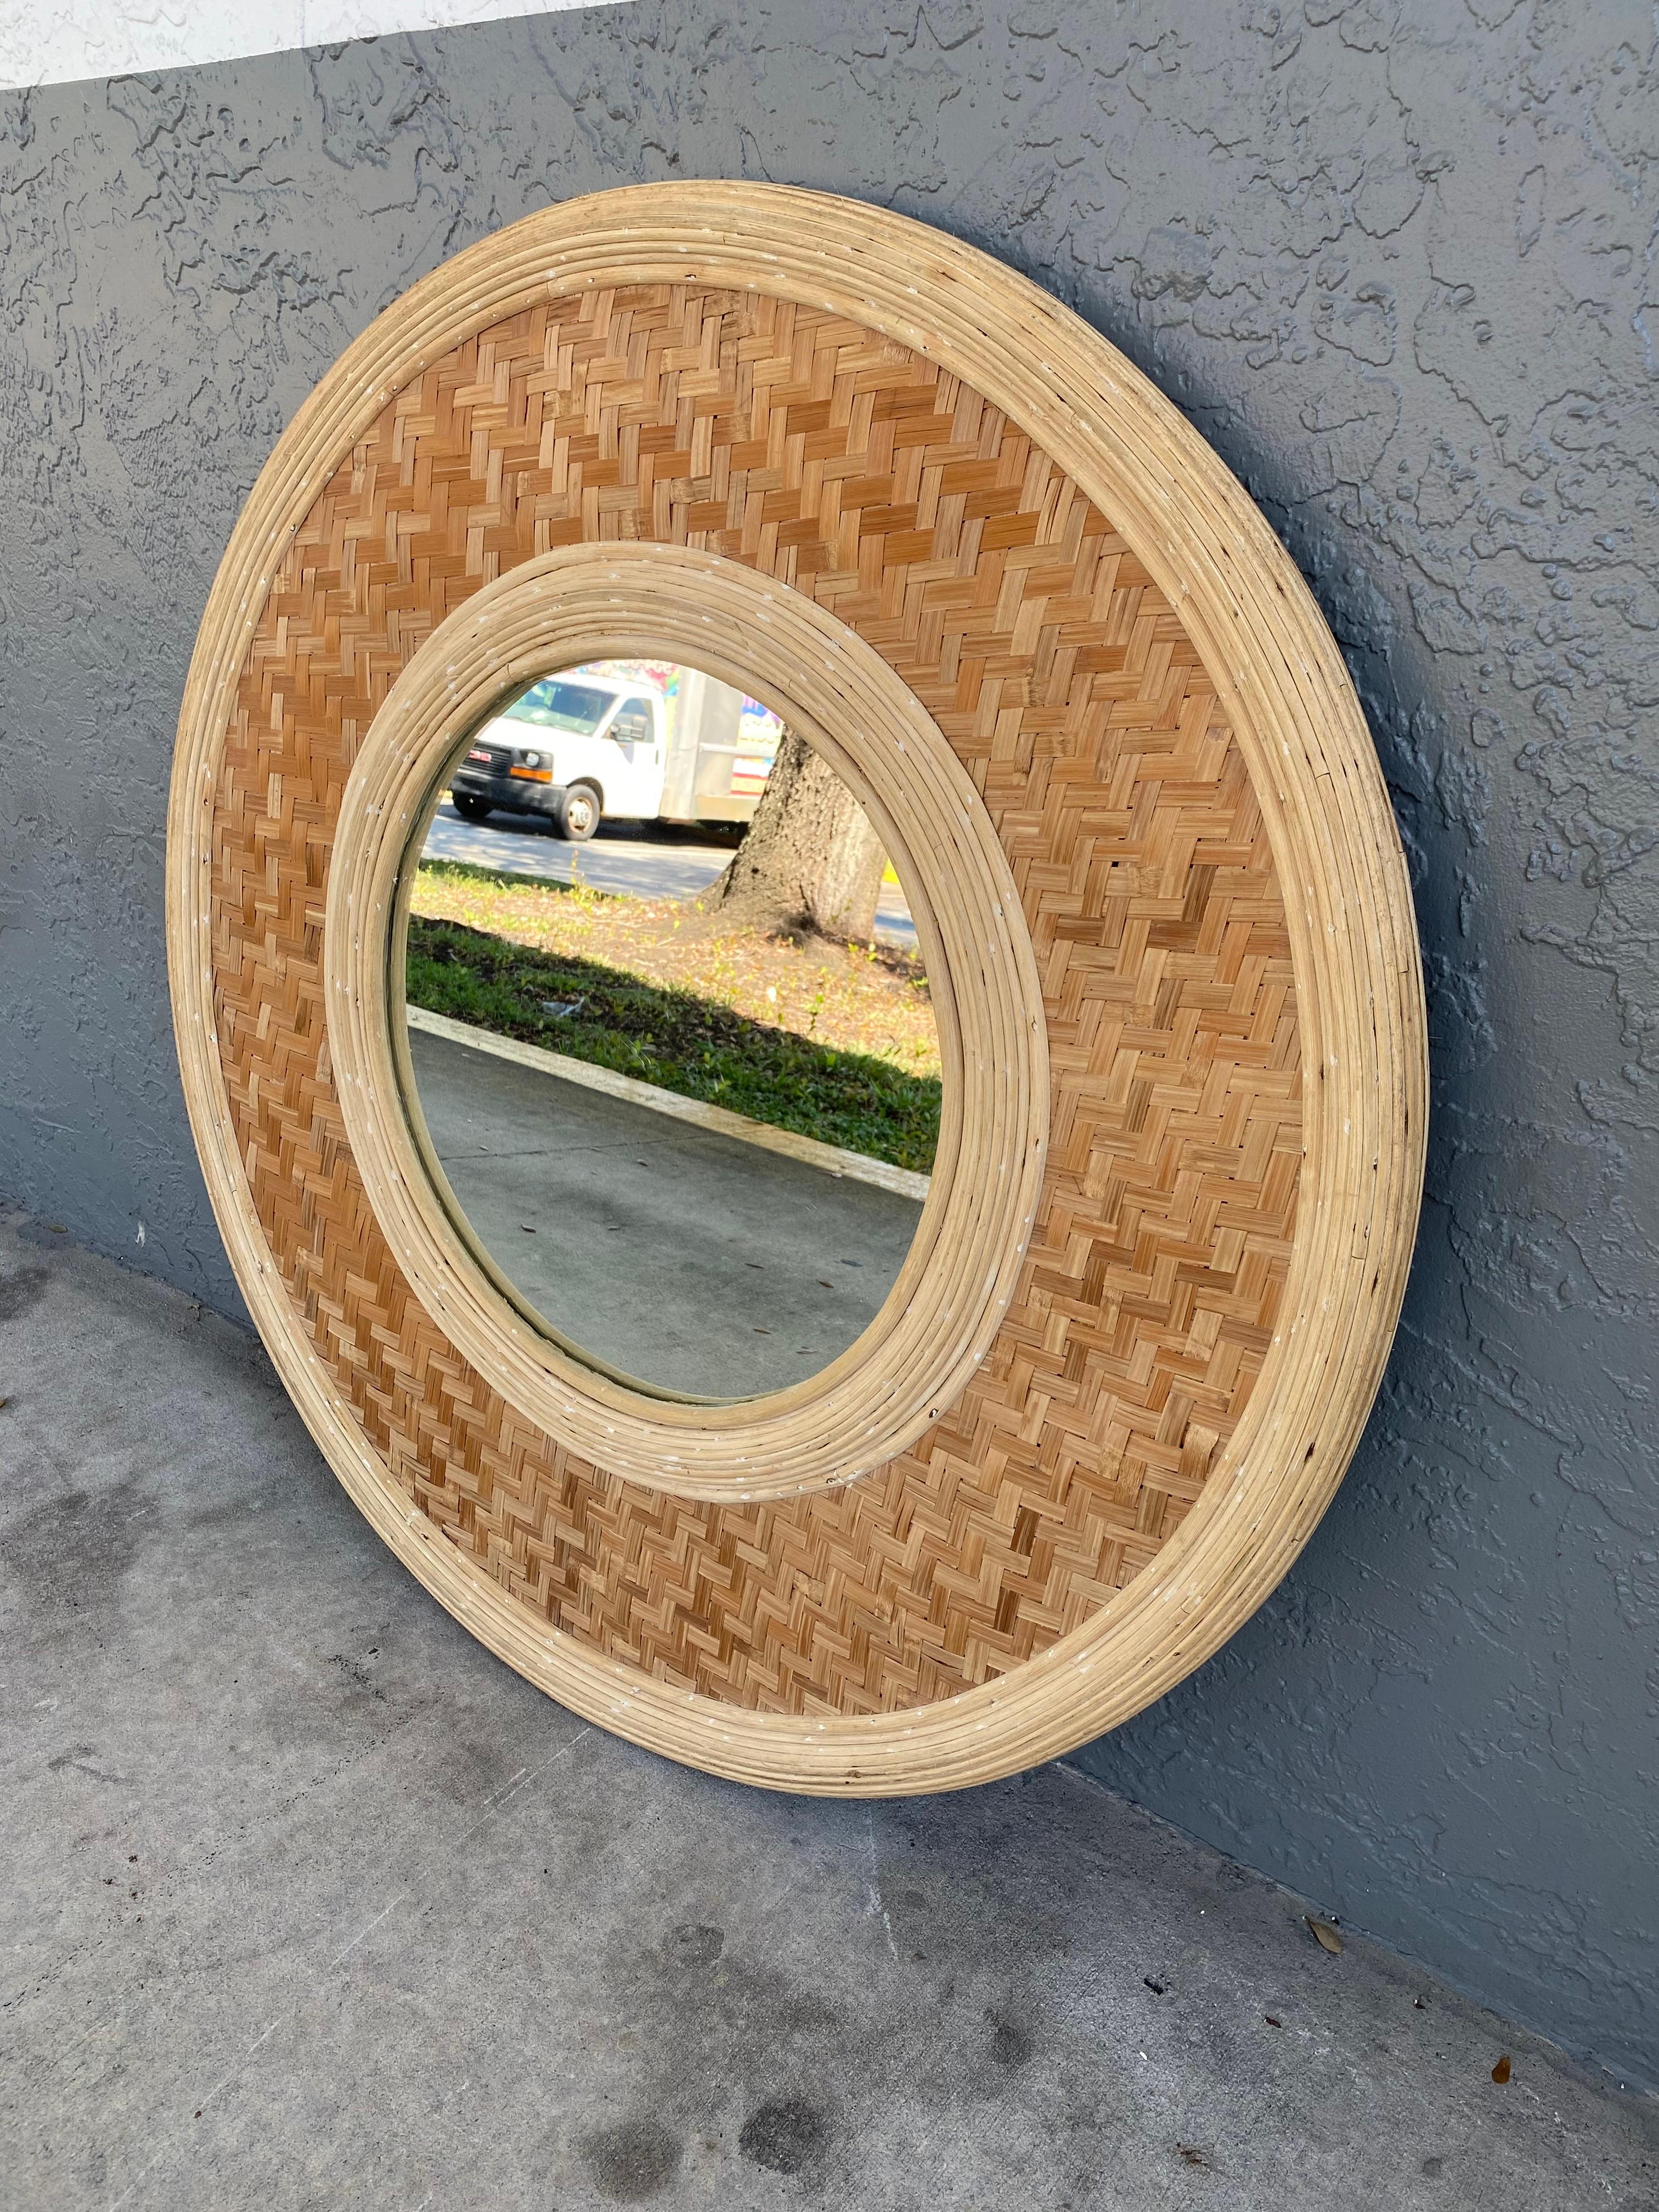 On offer on this occasion is one of the most stunning, rattan mirror you could hope to find. This is an ultra-rare opportunity to acquire what is, unequivocally, the best of the best, it being a most spectacular and beautifully-presented mirror.